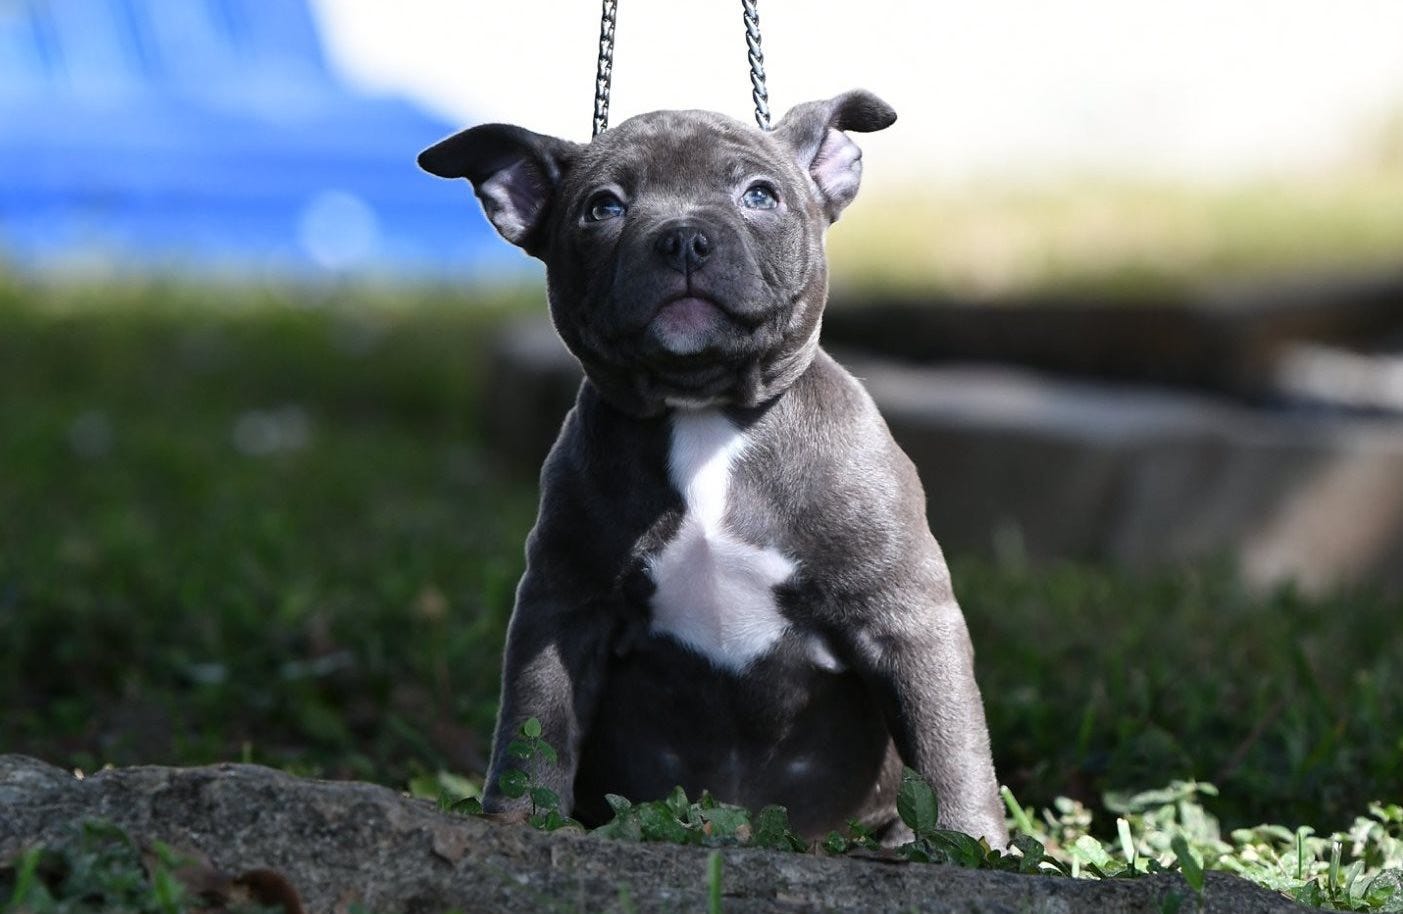 micro mini bully puppies for sale